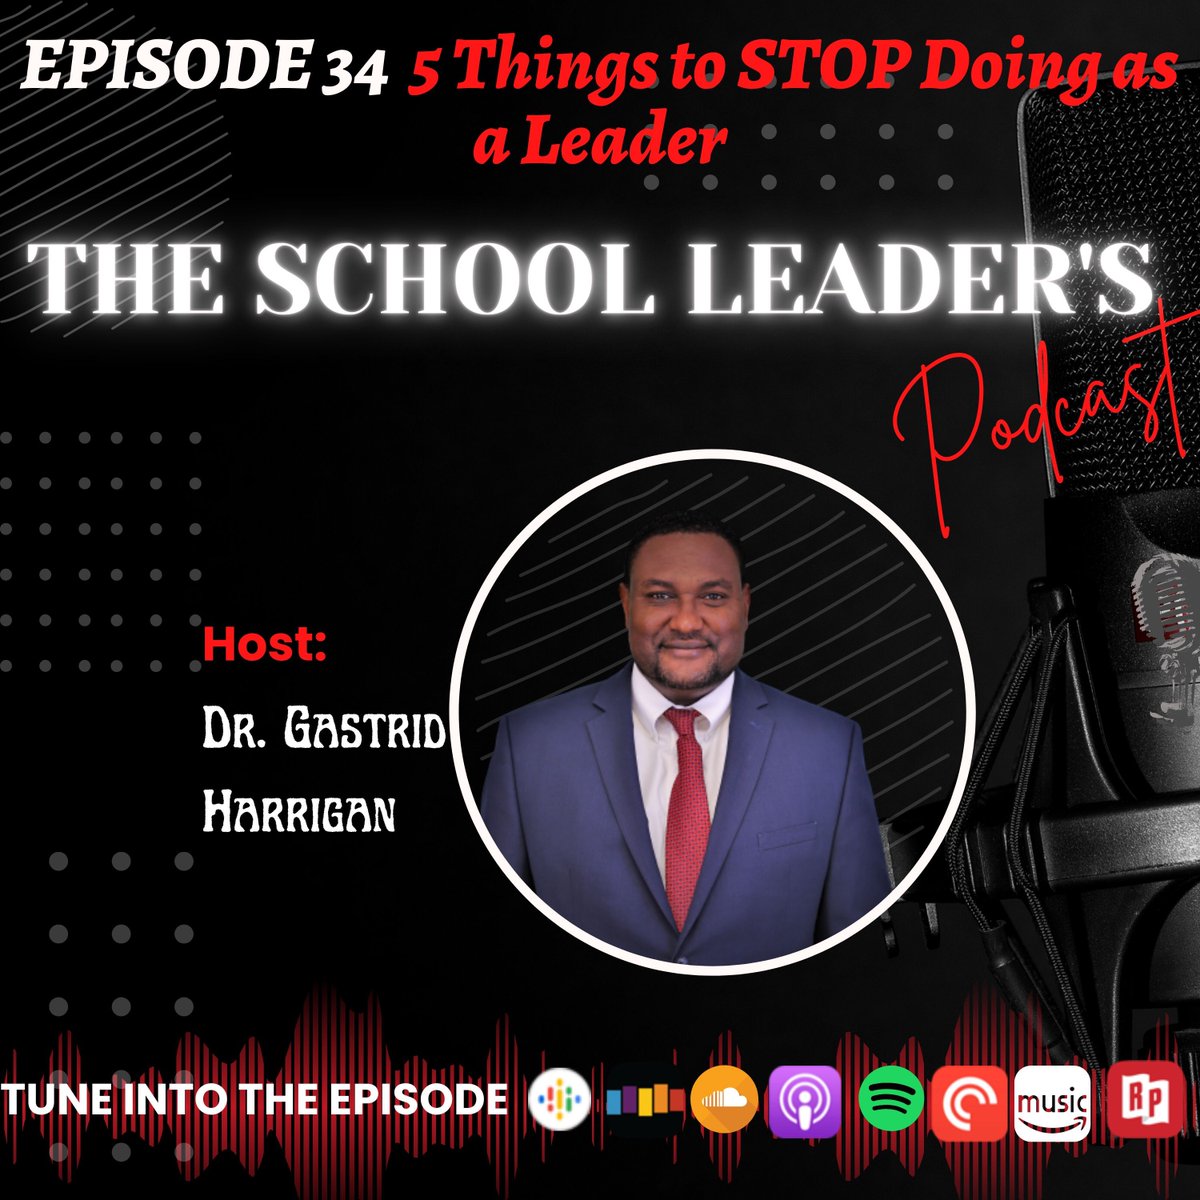 💥 NEW EPISODE ALERT! 💥
In Ep#34, I talk about 5 Things to Stop Doing as a Leader. Listen now
Apple: buff.ly/4aYKoFU
Spotify: buff.ly/3RXTERV

#educationpodcast #edchat @ritawirtz @srlindstrom @JodiMartin_AP @2Principals @JacobDunn @lauderhill612 @MsJuran @orr_ap